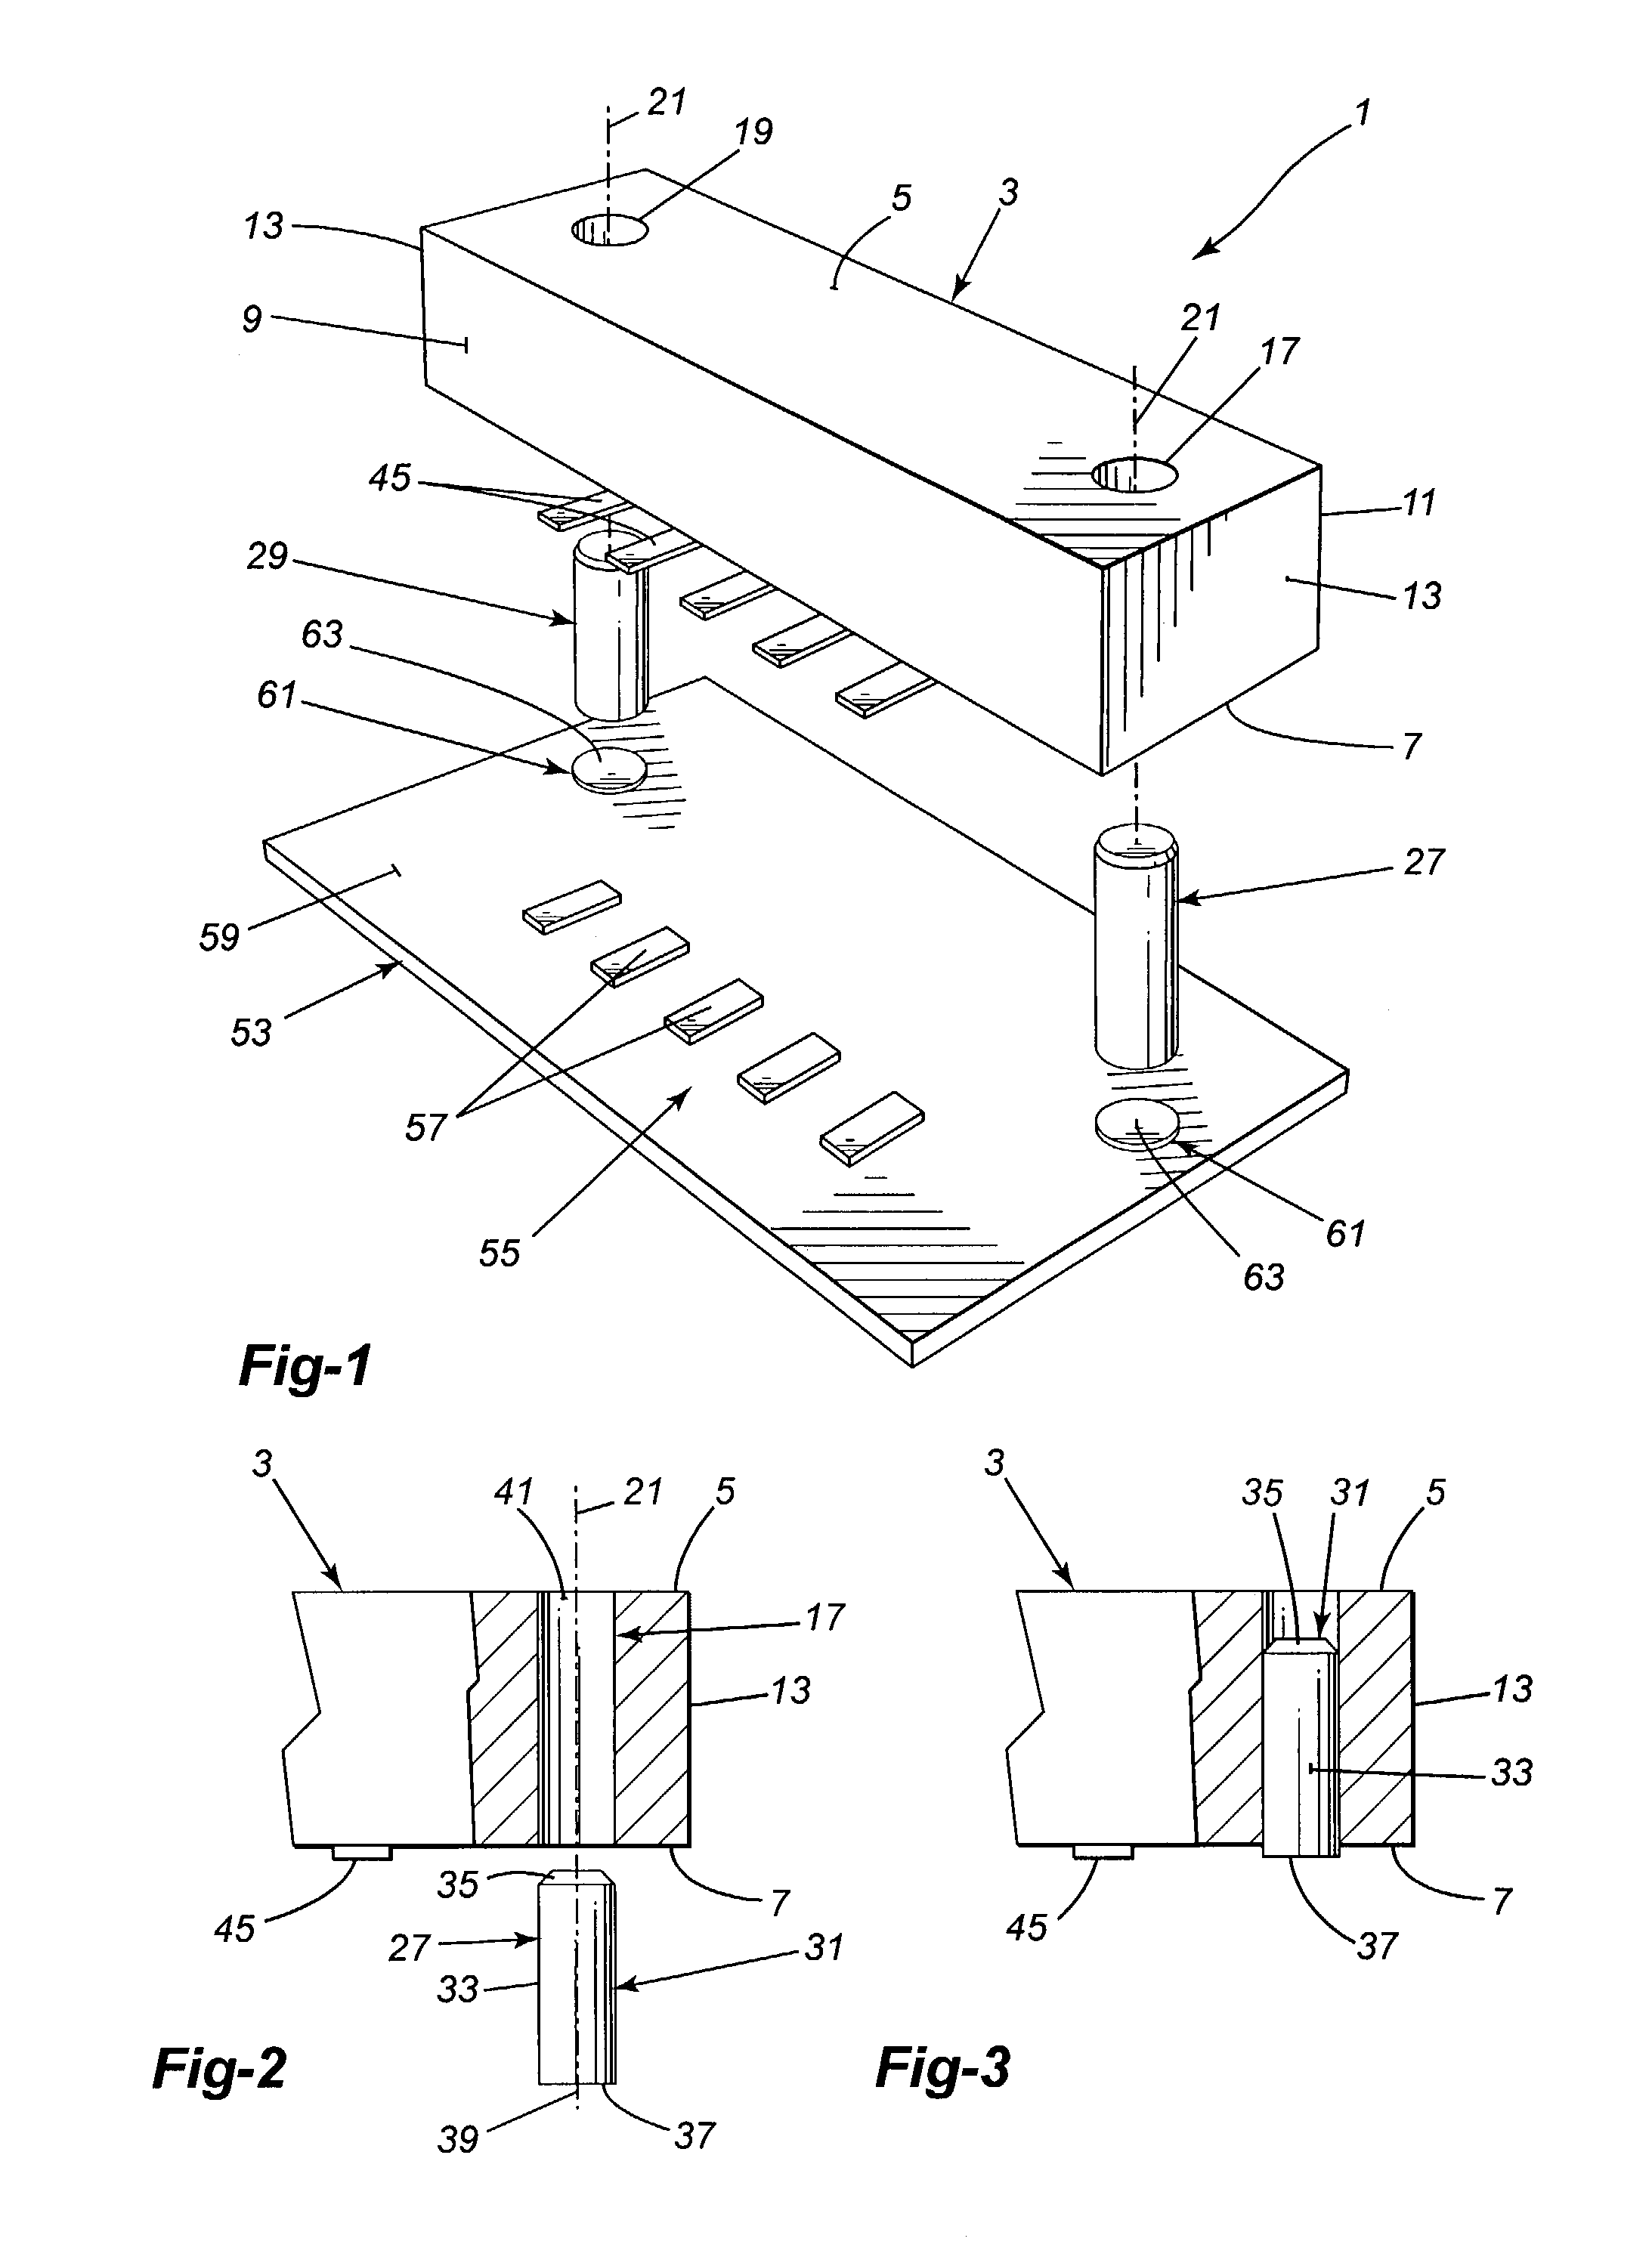 Surface mounted electrical component